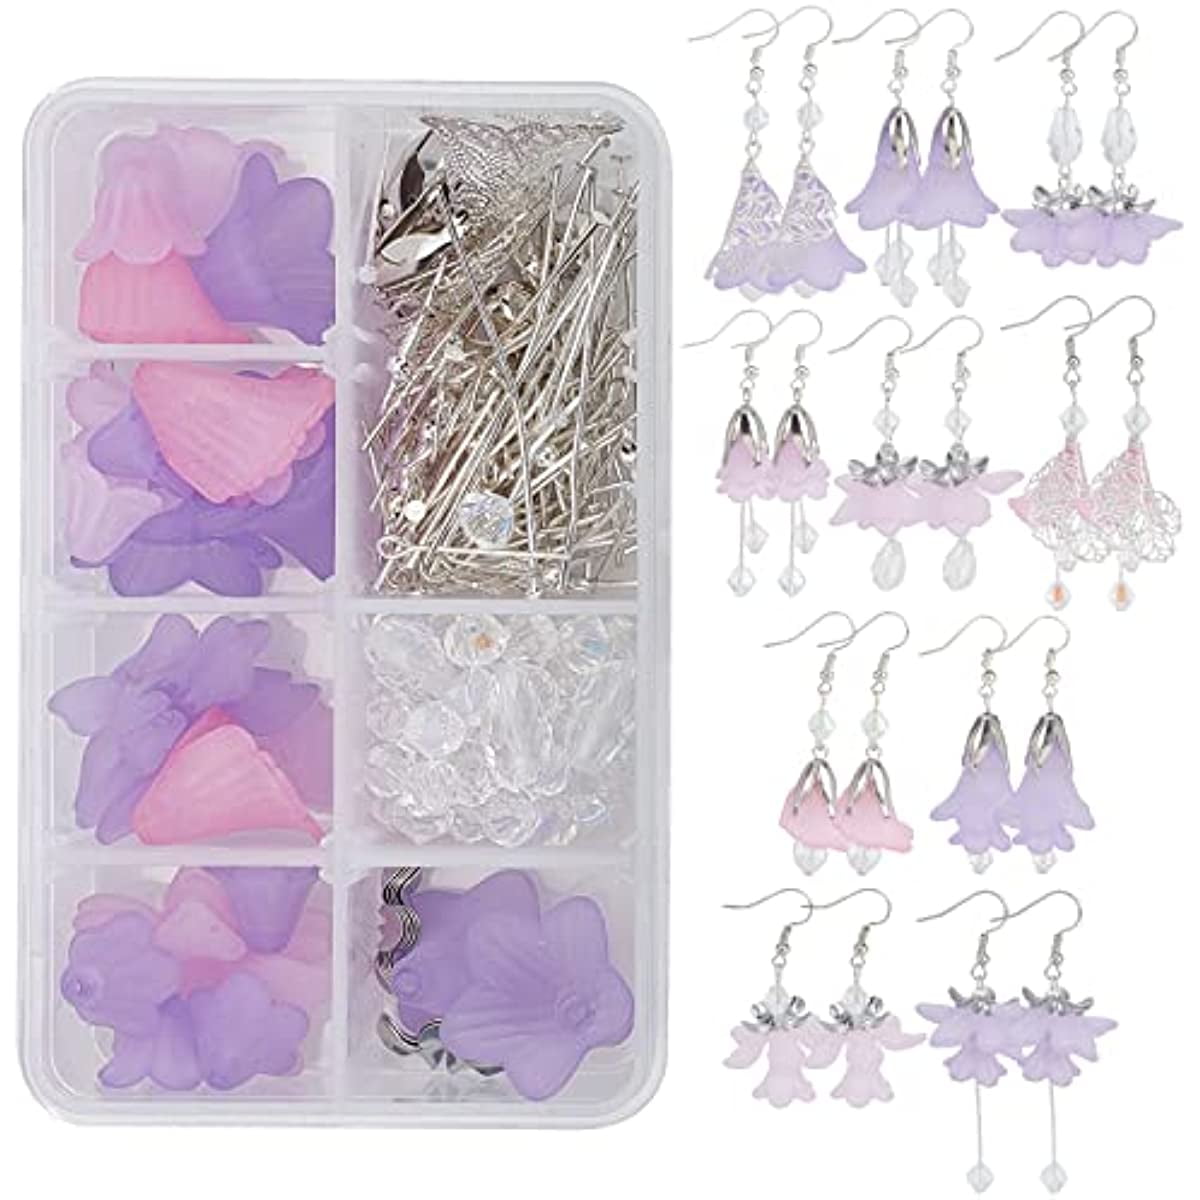 Joez Wonderful 50pcs Flower Charms for Jewelry Making, Acrylic Floral Earring Jewelry Charms Pendants Leaf Beads for DIY Crafts Necklaces Earrings